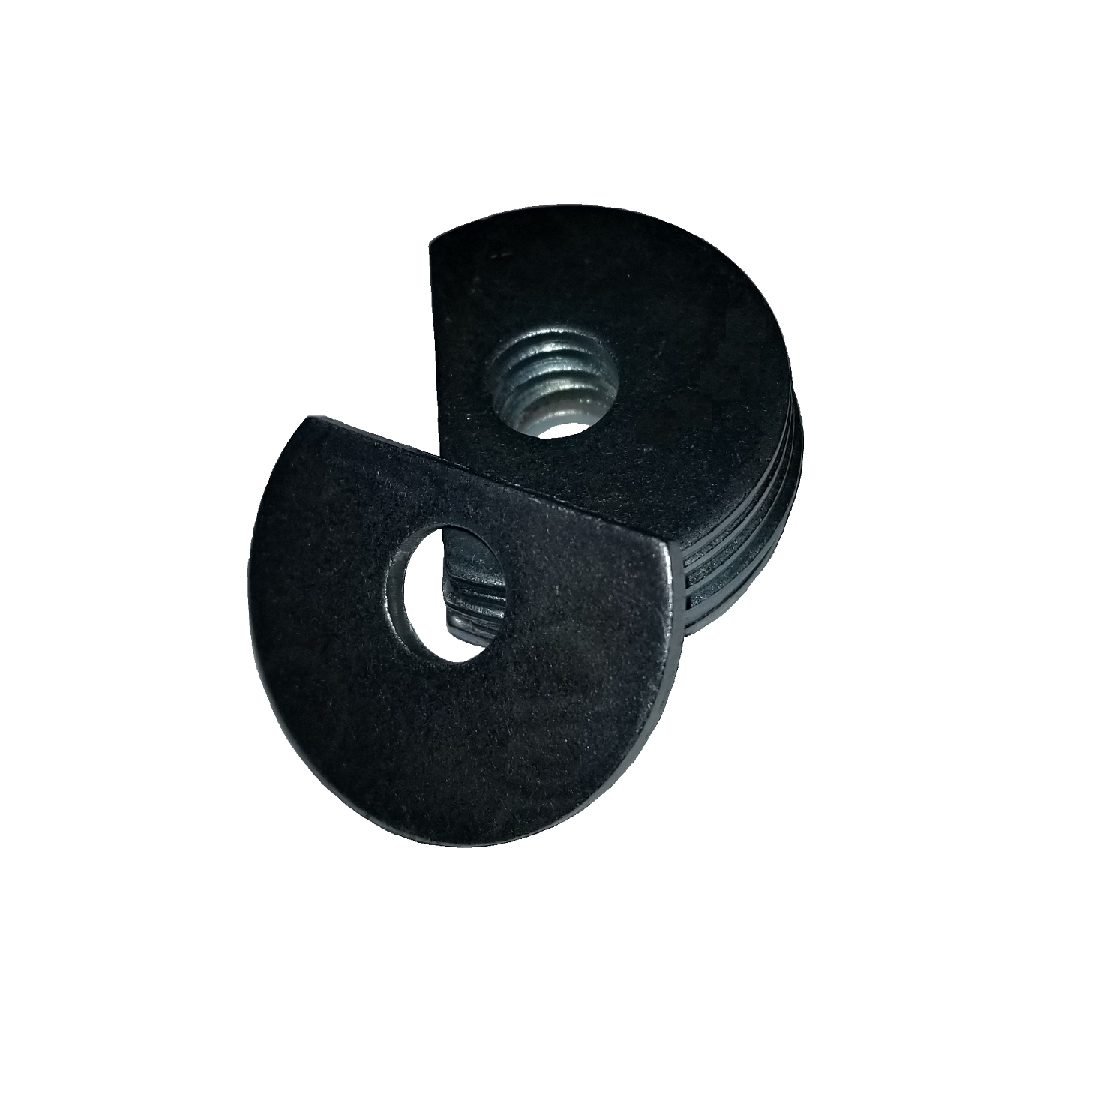 Clipped OD Washer - 0.312 ID, 0.875 OD, 0.130 Thick, Low Carbon Steel - Soft